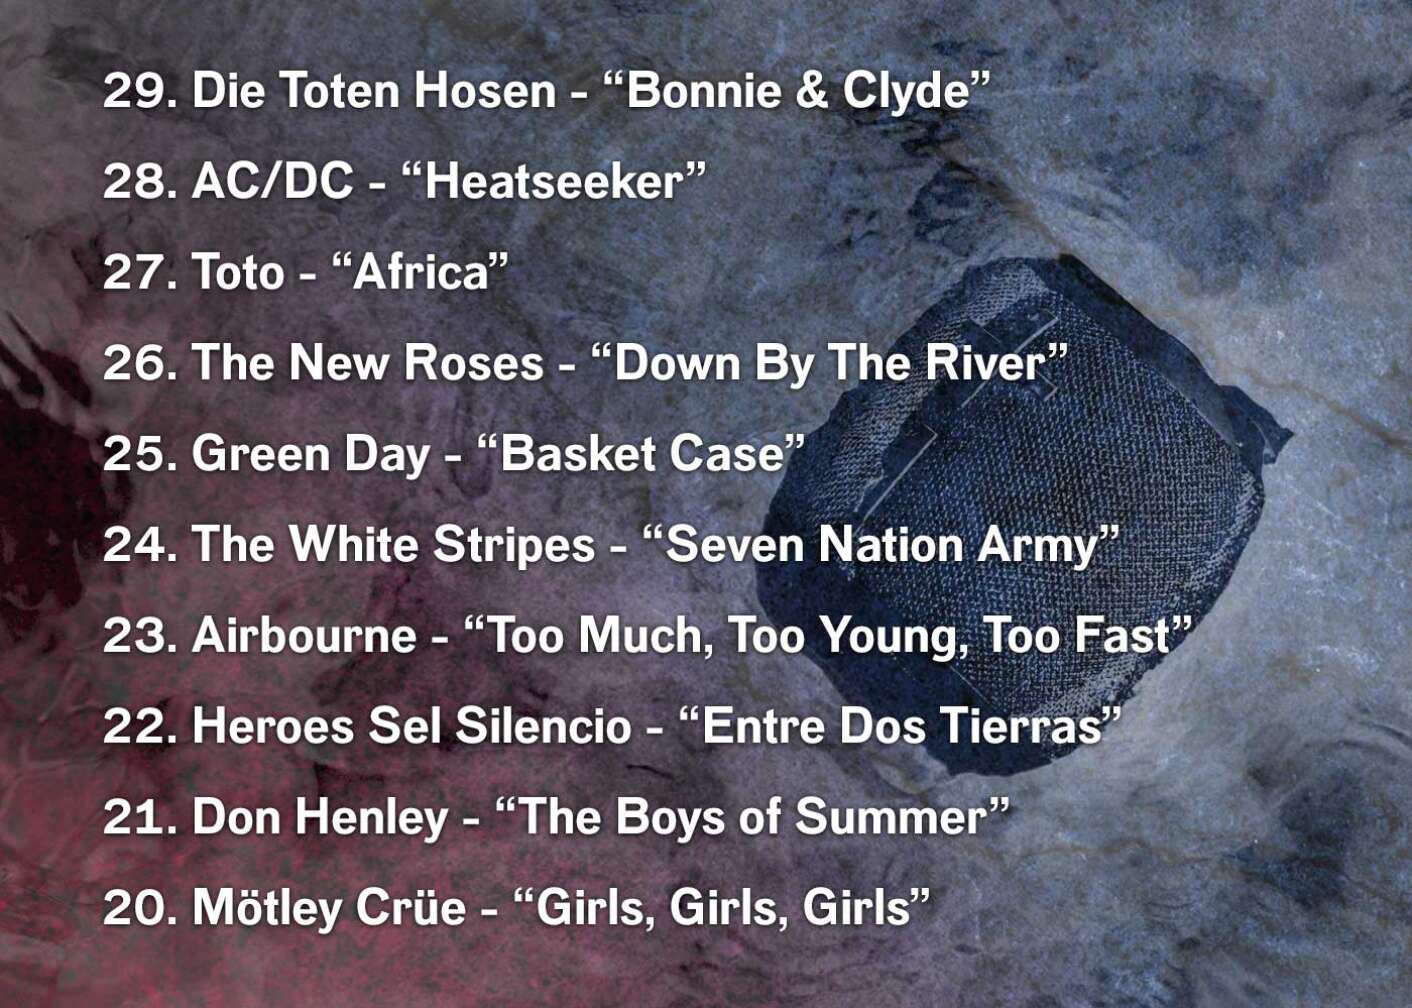 29. Die Toten Hosen - “Bonnie & Clyde” 28. AC/DC - “Heatseeker” 27. Toto - “Africa” 26. The New Roses - “Down By The River” 25. Green Day - “Basket Case” 24. The White Stripes - “Seven Nation Army” 23. Airbourne - “Too Much, Too Young, Too Fast” 22. Heroes Sel Silencio - “Entre Dos Tierras” 21. Don Henley - “The Boys of Summer” 20. Mötley Crüe - “Girls, Girls, Girls”